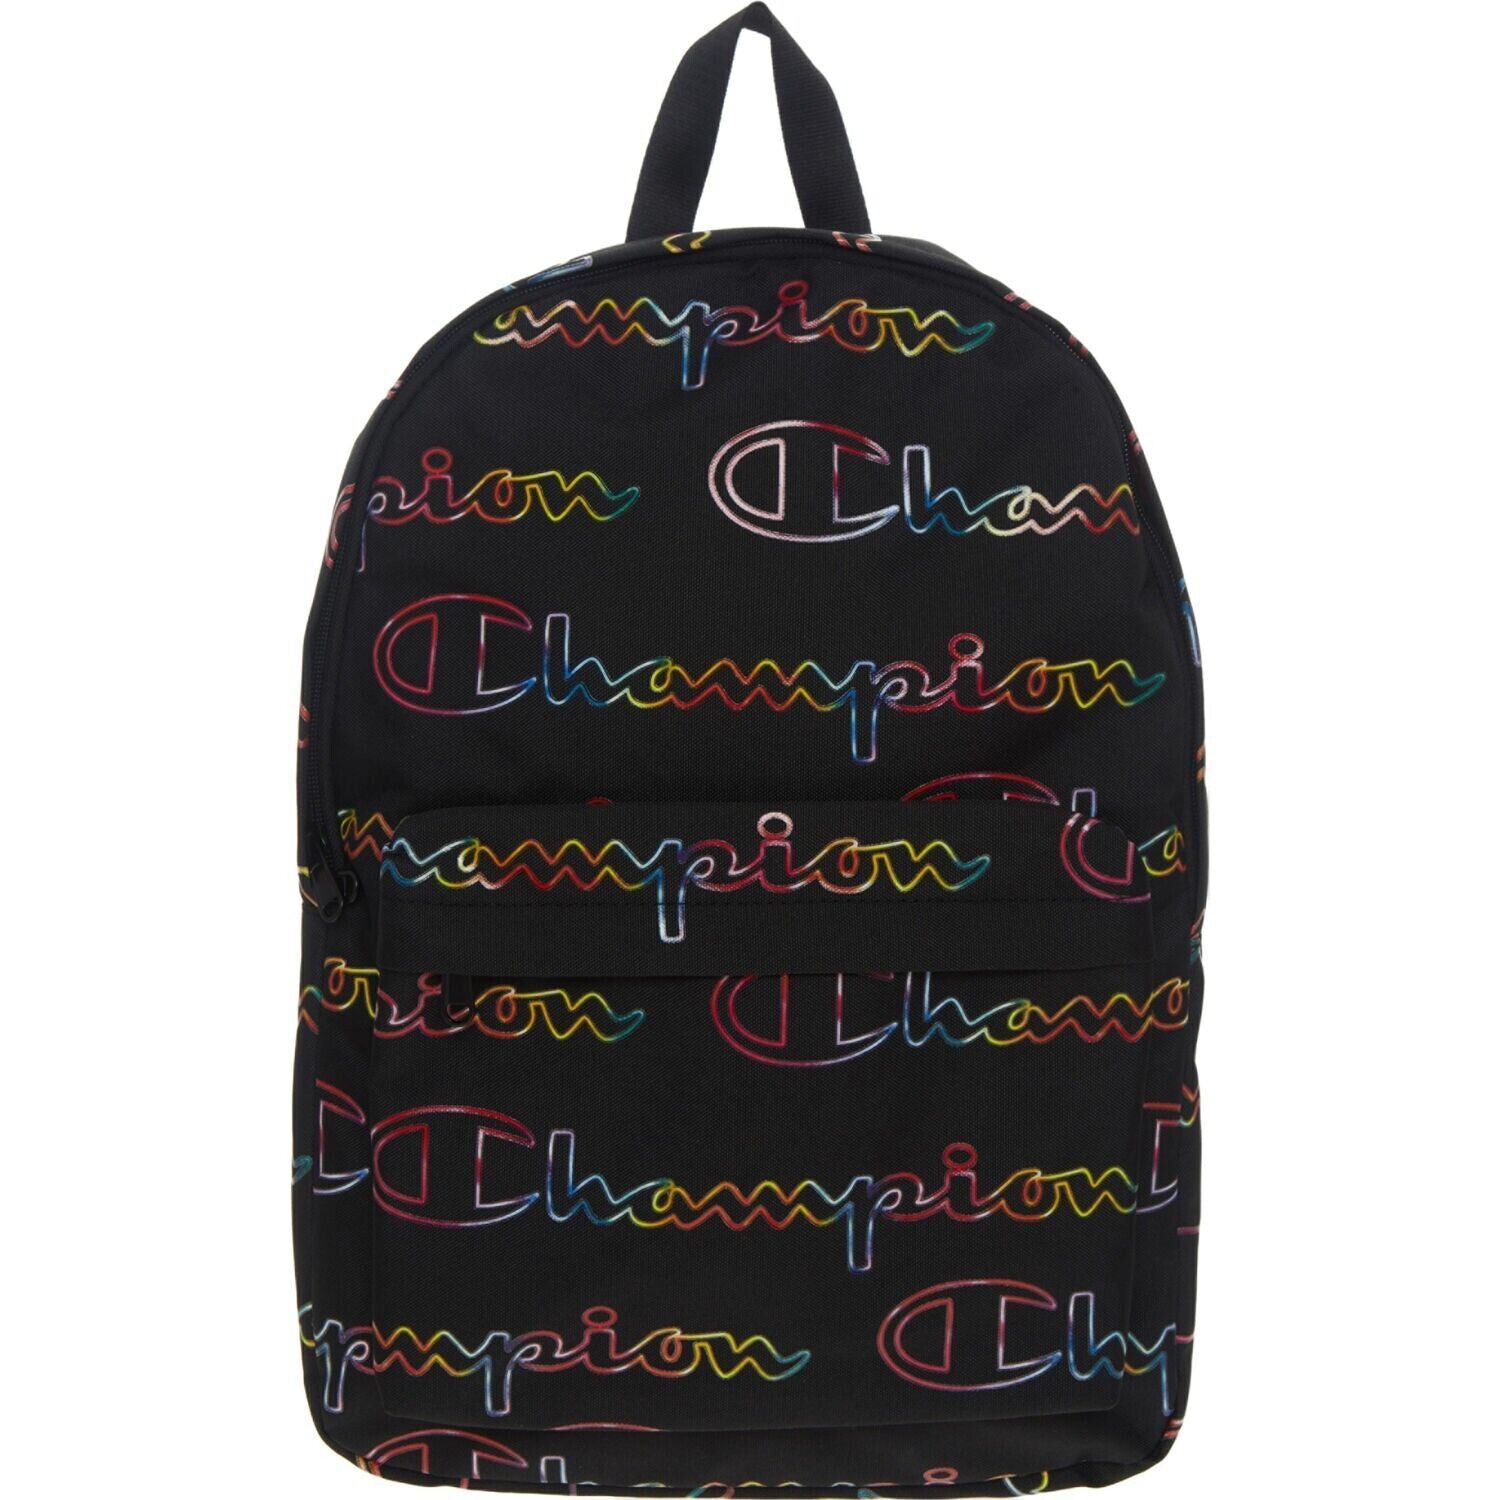 CHAMPION School/Travel Backpack, with Laptop Sleeve, Black/Multicoloured